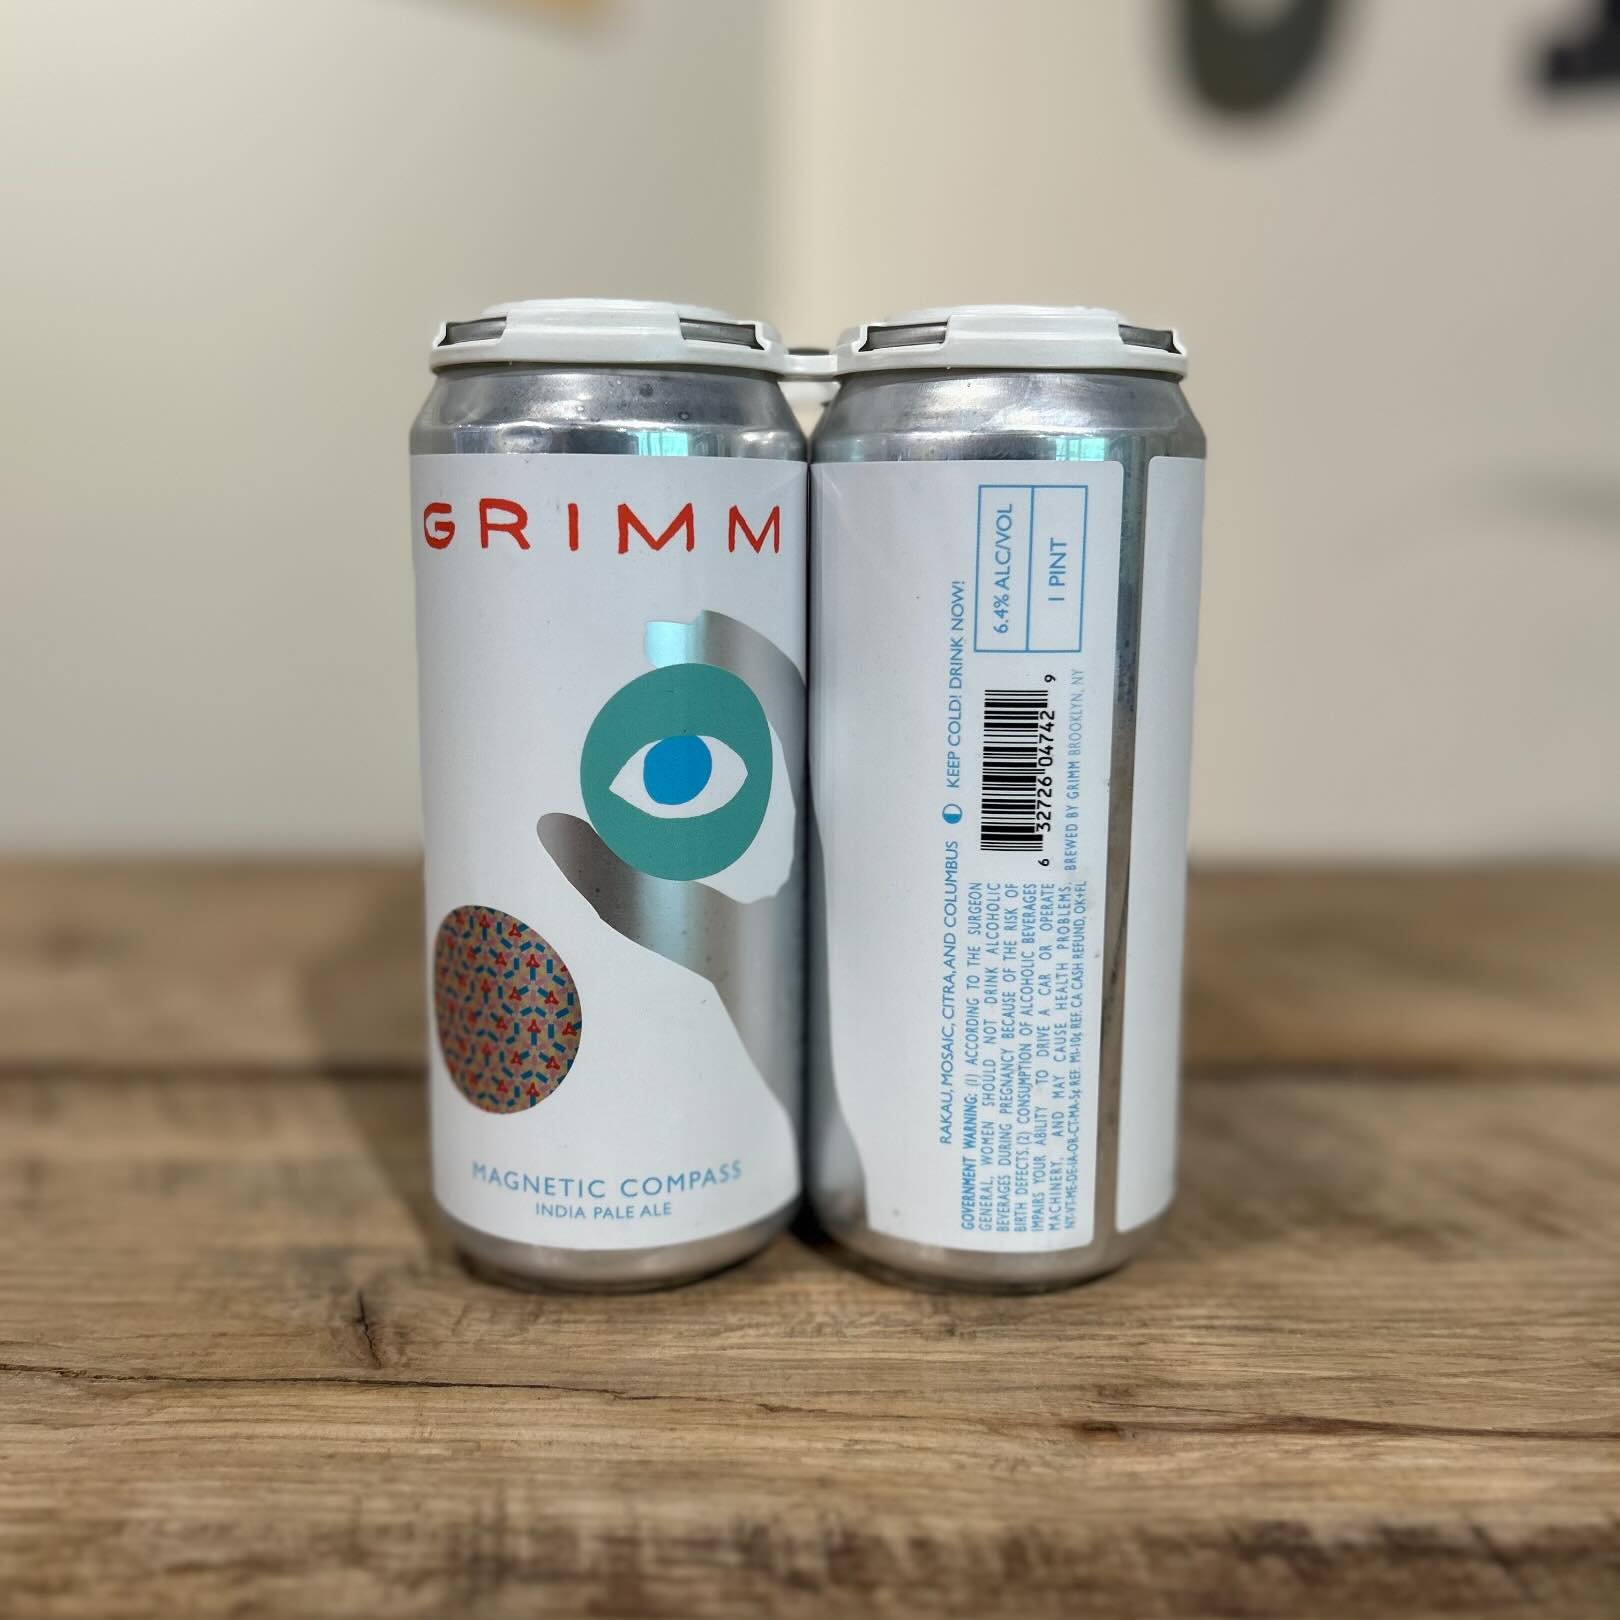 @grimmales is back in the shop this week #NowAvailable #SudburyCraftBeer #SudburyMA
&mdash;
Magnetic Compass! This 6.4% IPA prominently features NZ Rakau hops, bringing a unique mix of candied orchard fruit, stone fruit, and tropical aromas with subt